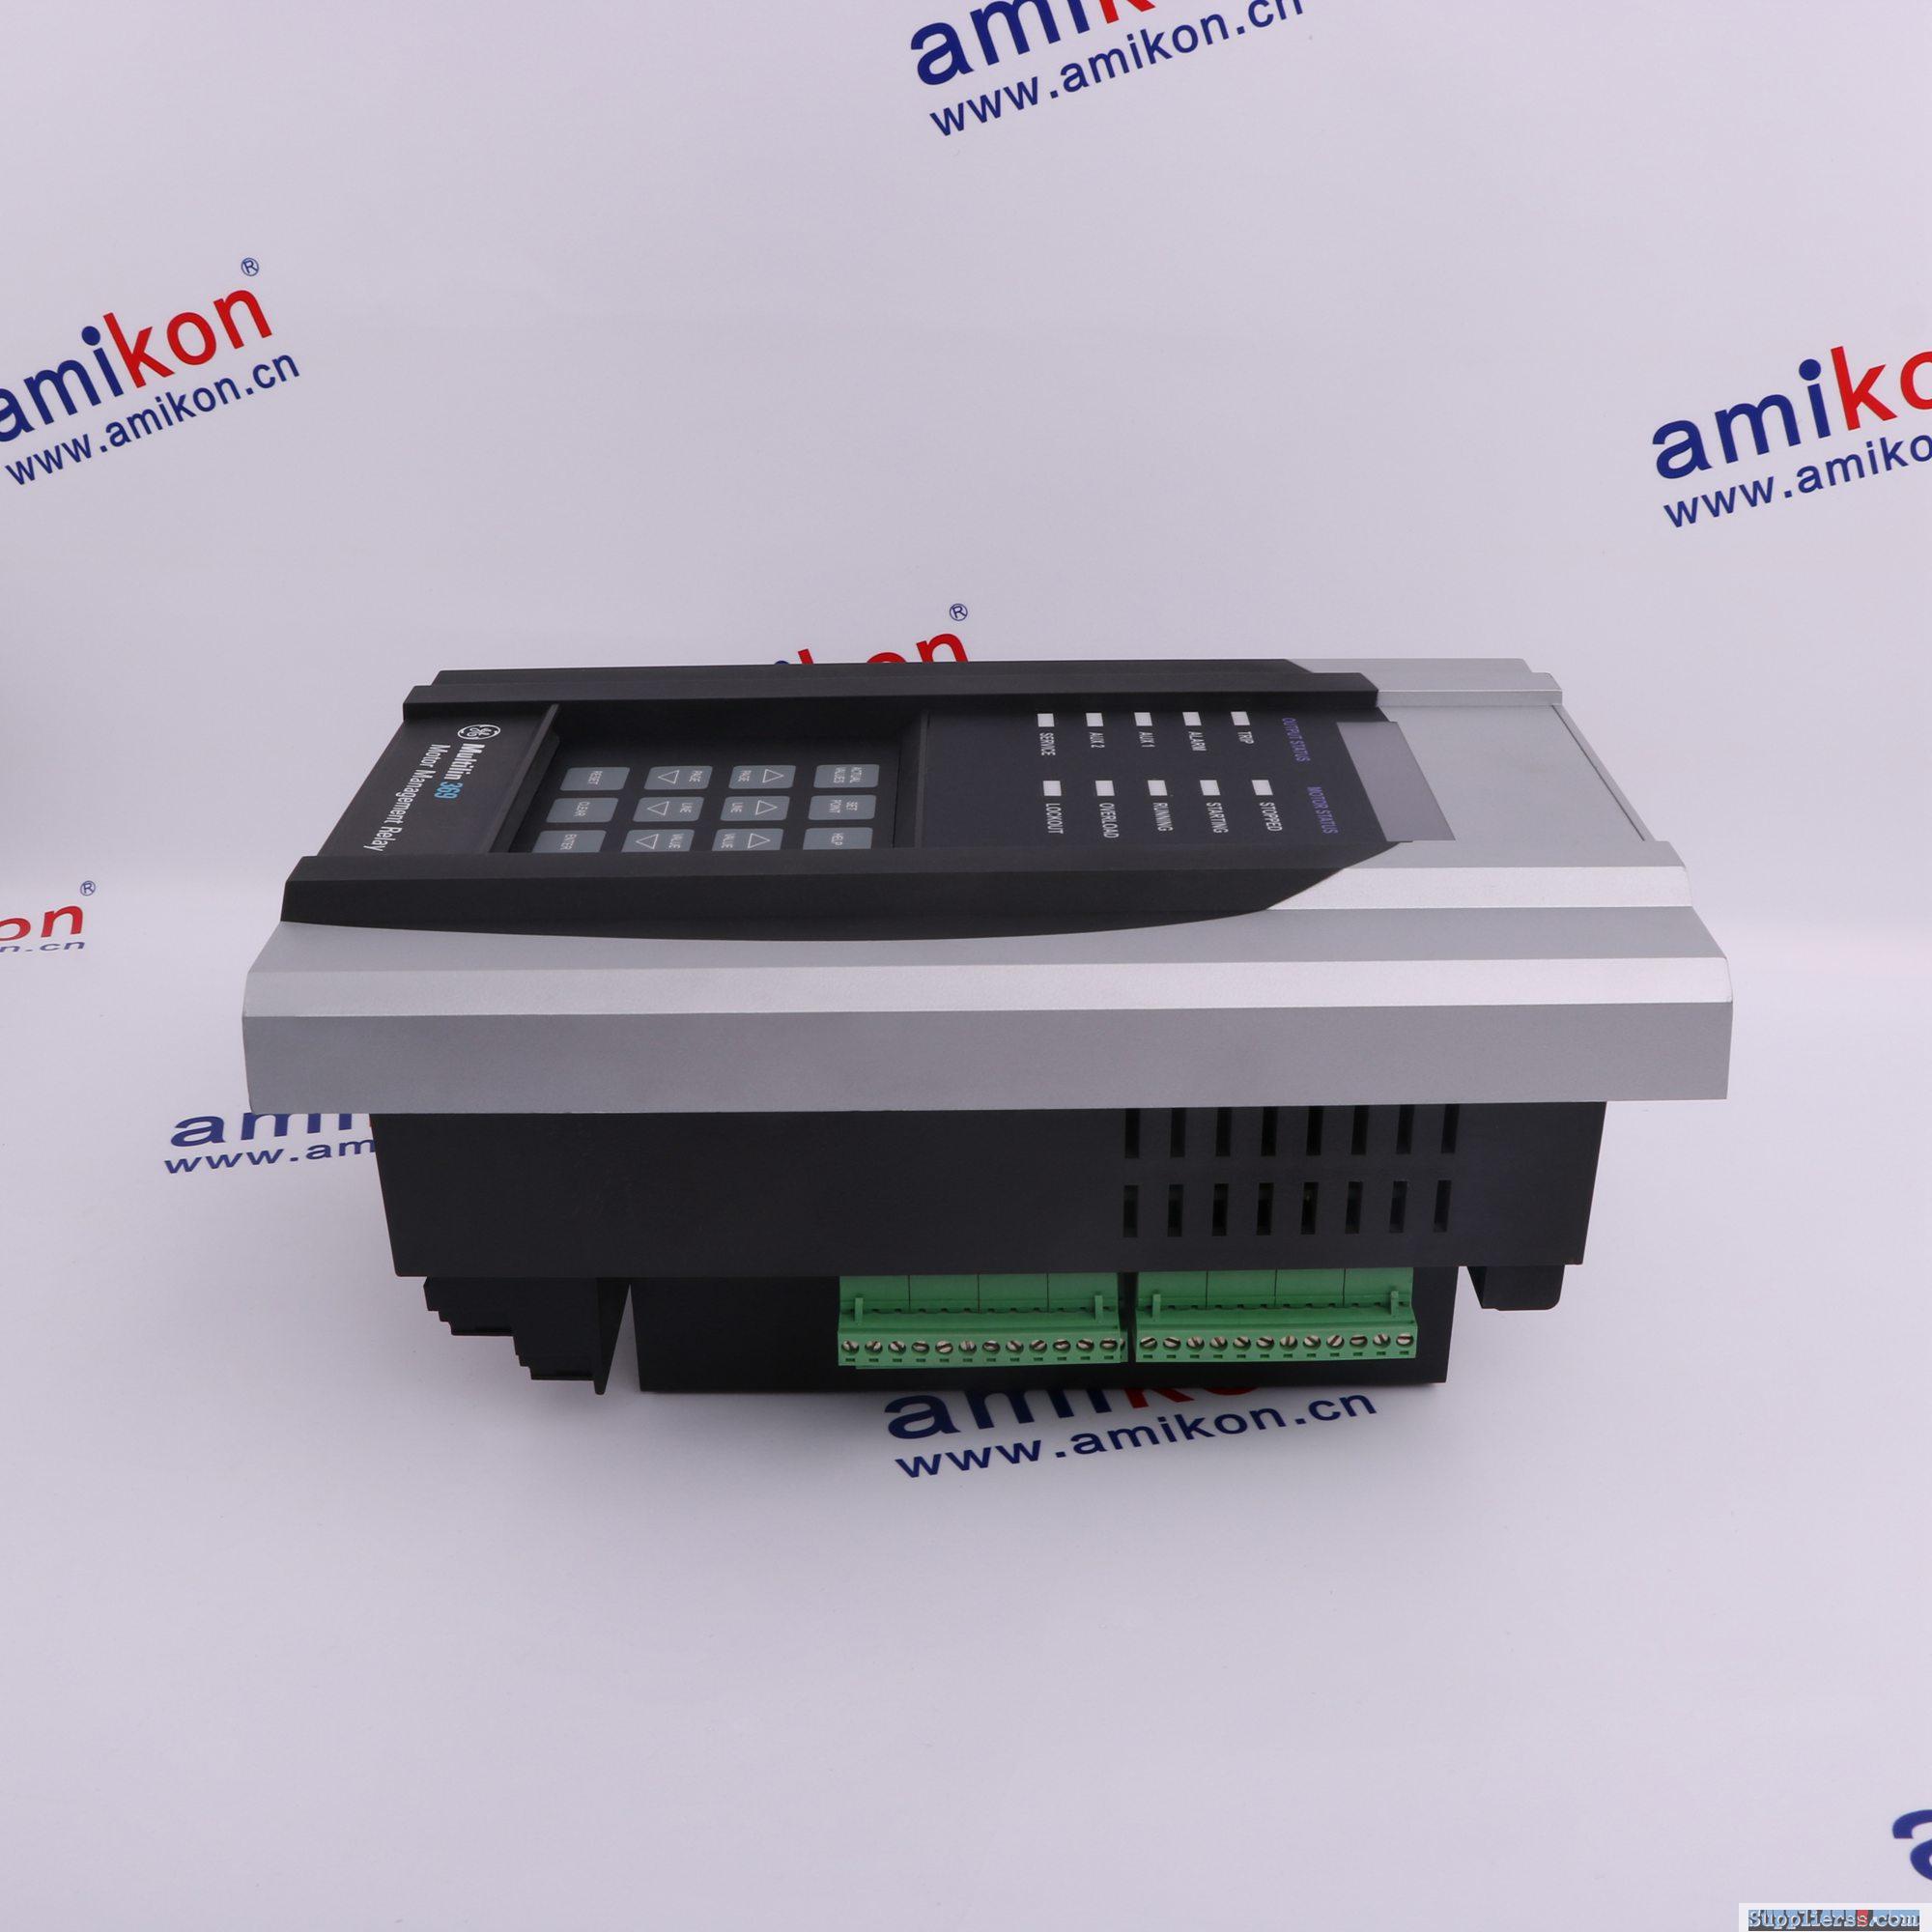 IN STOCK GE IC694PWR321 PLS contact Tiffany Guan:sales8@amikon.cn